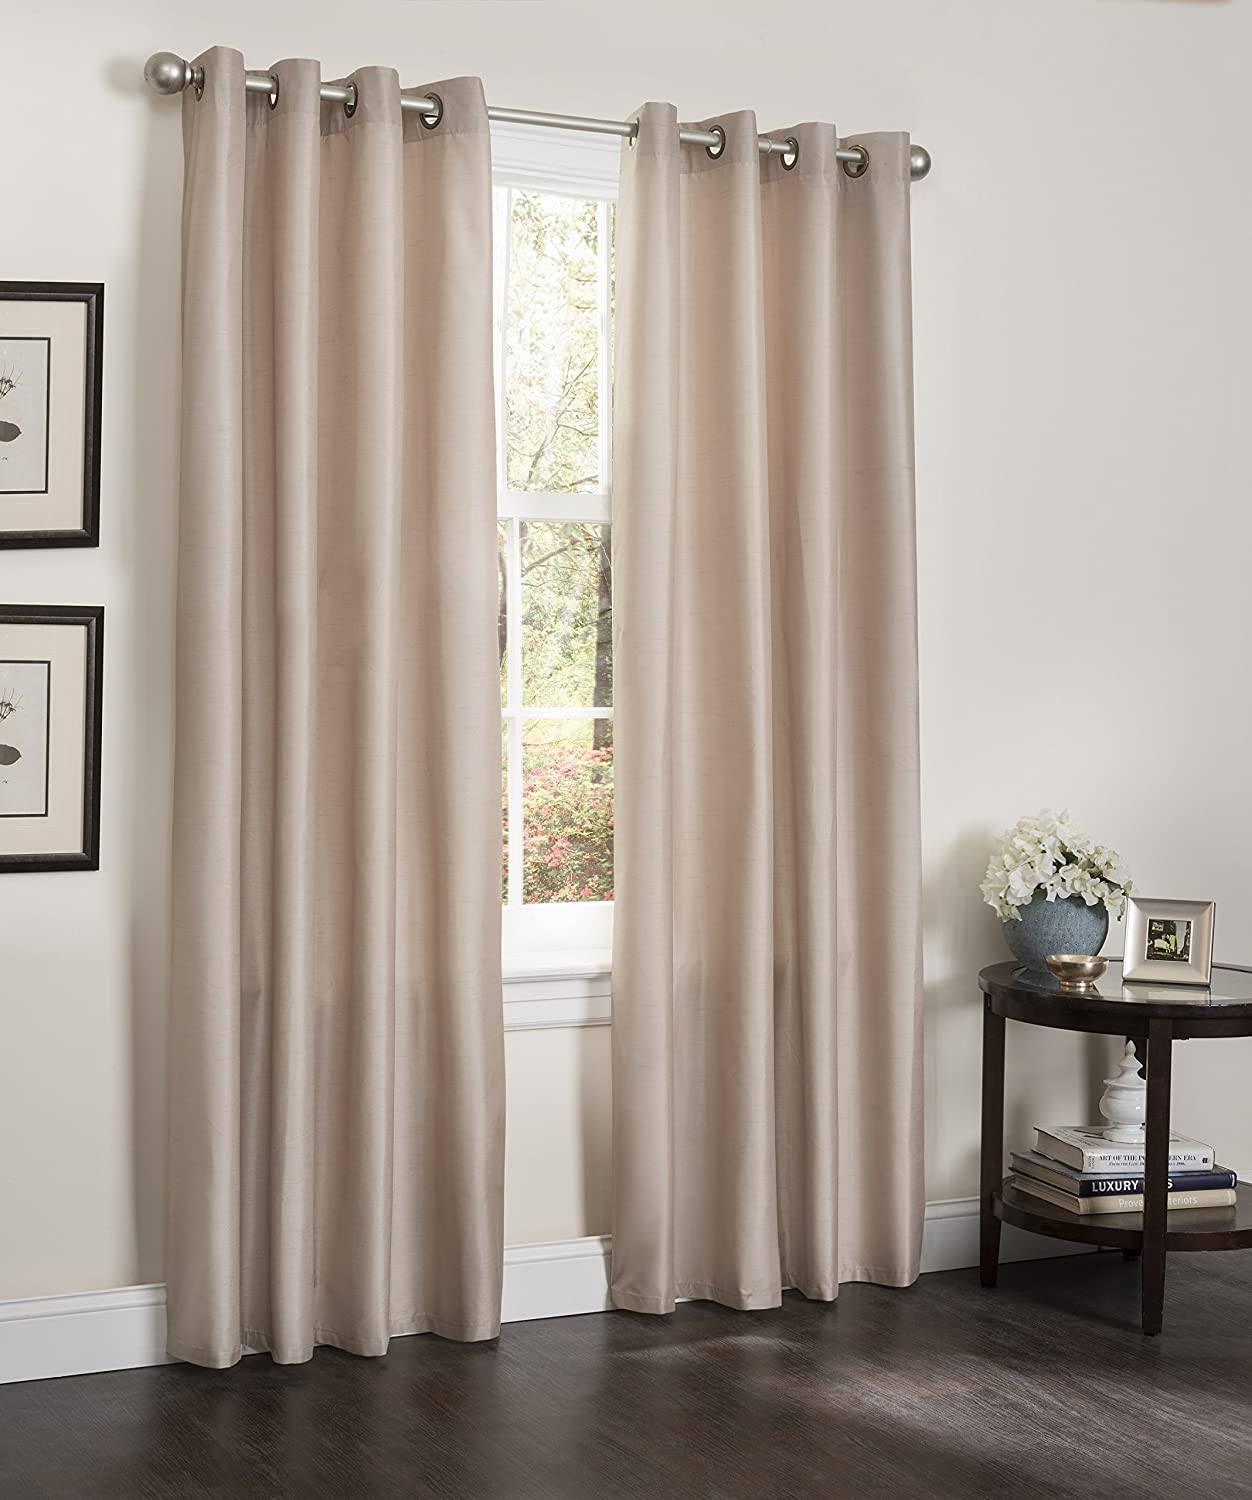 Kashi Home Erin Blackout 54 x 84 in. Single Curtain Panel - Linen Universe Co.